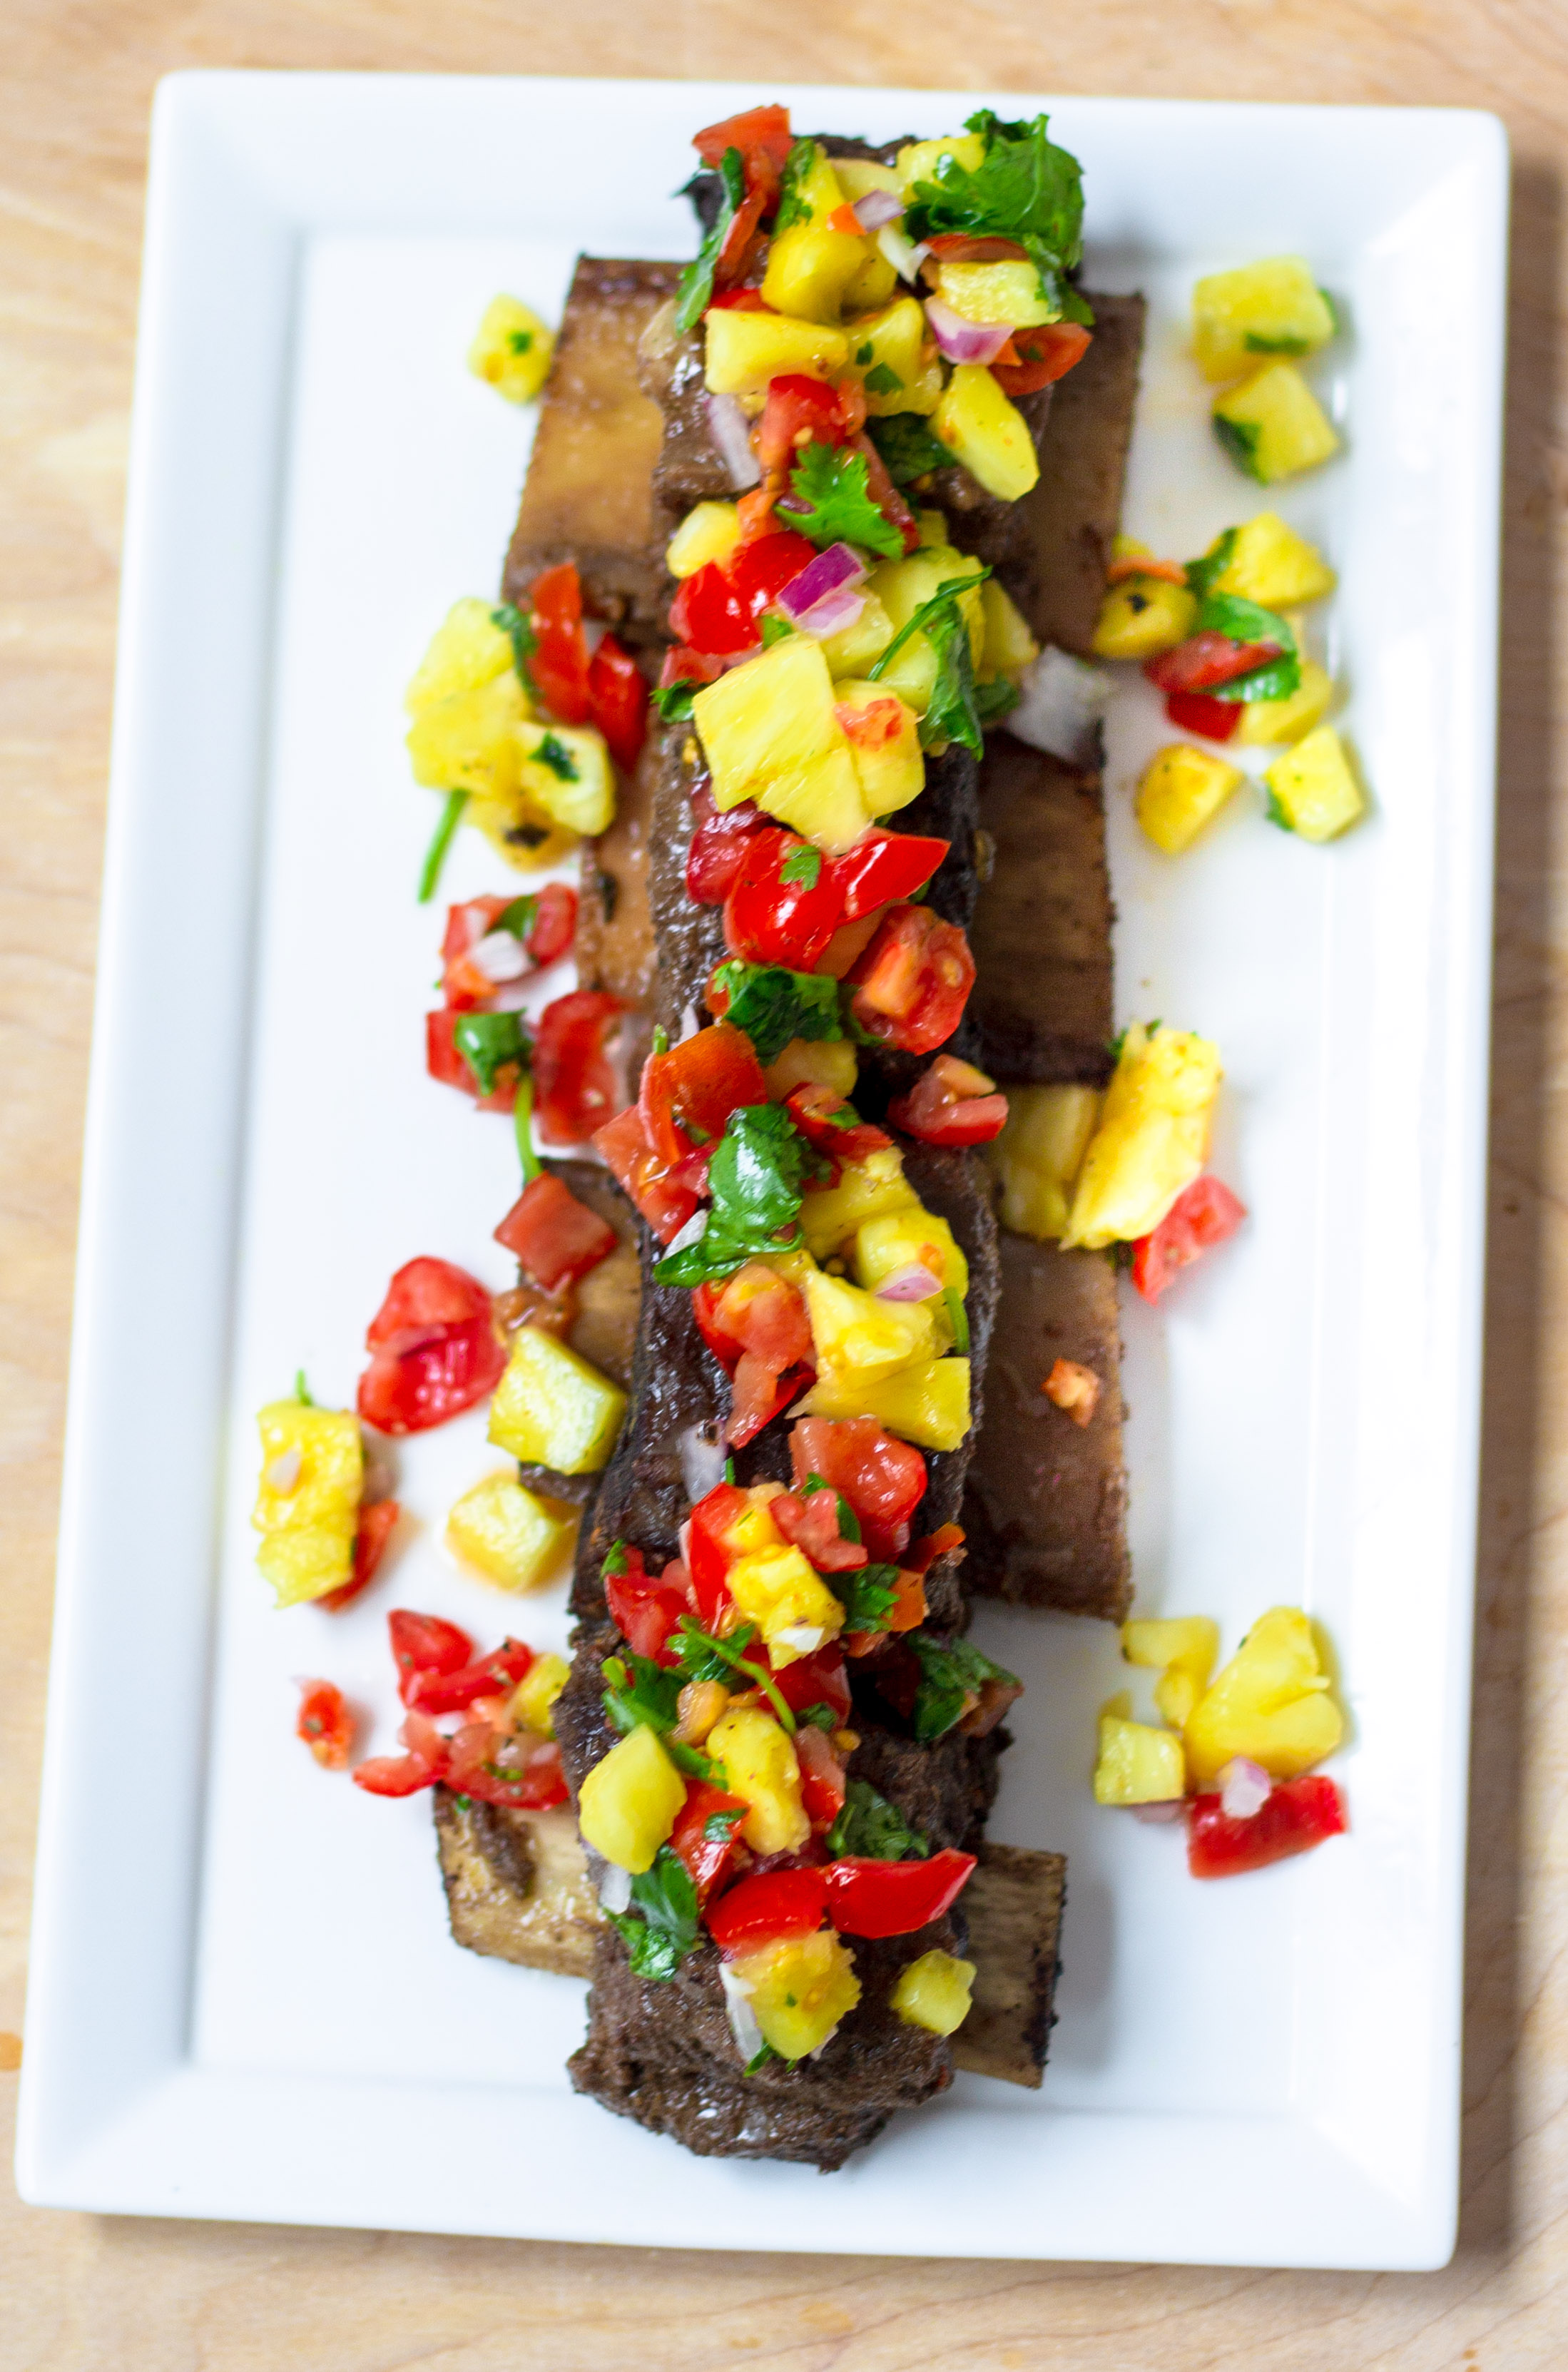 Braised Caribbean Short Ribs with Pineapple Salsa - DIVERSE DINNERS